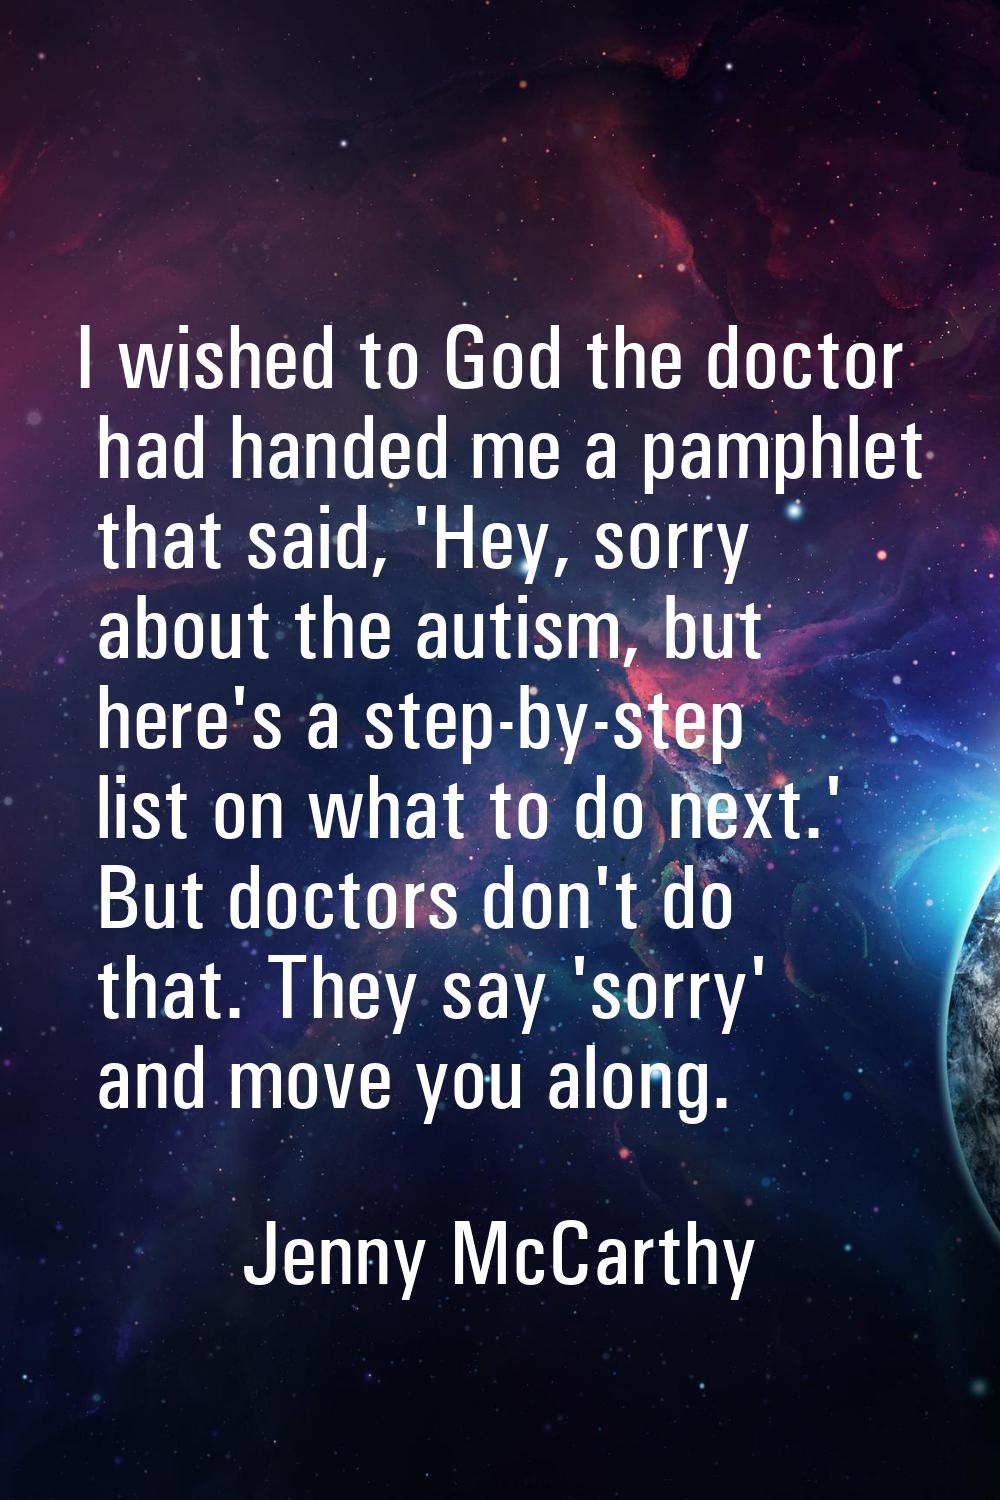 I wished to God the doctor had handed me a pamphlet that said, 'Hey, sorry about the autism, but he